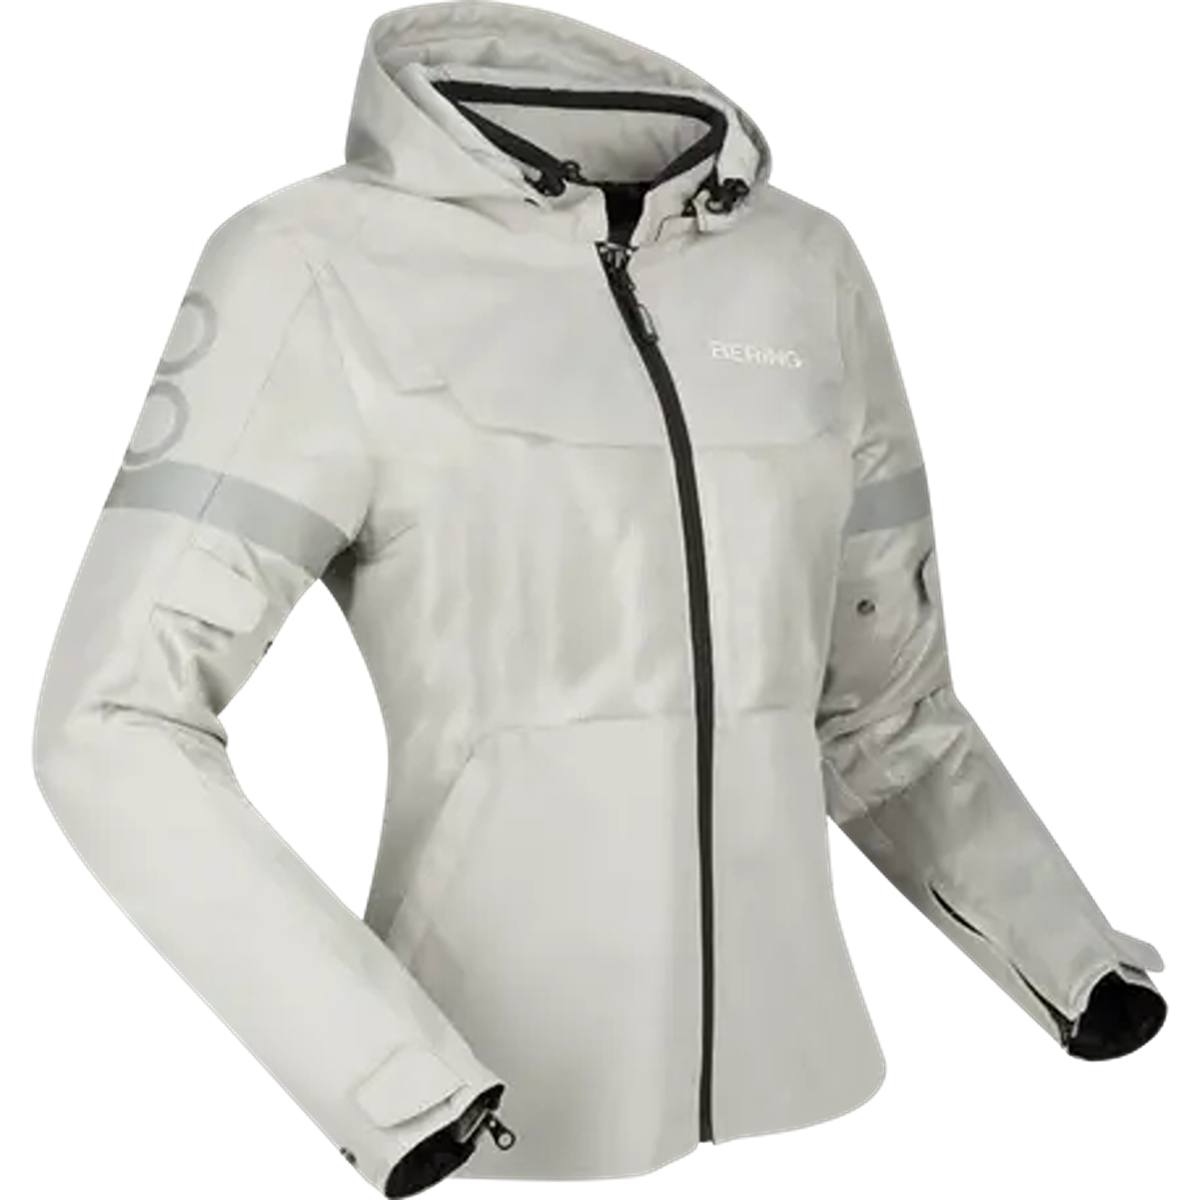 Image of Bering Lady Profil Jacket Grey Black Taille T6